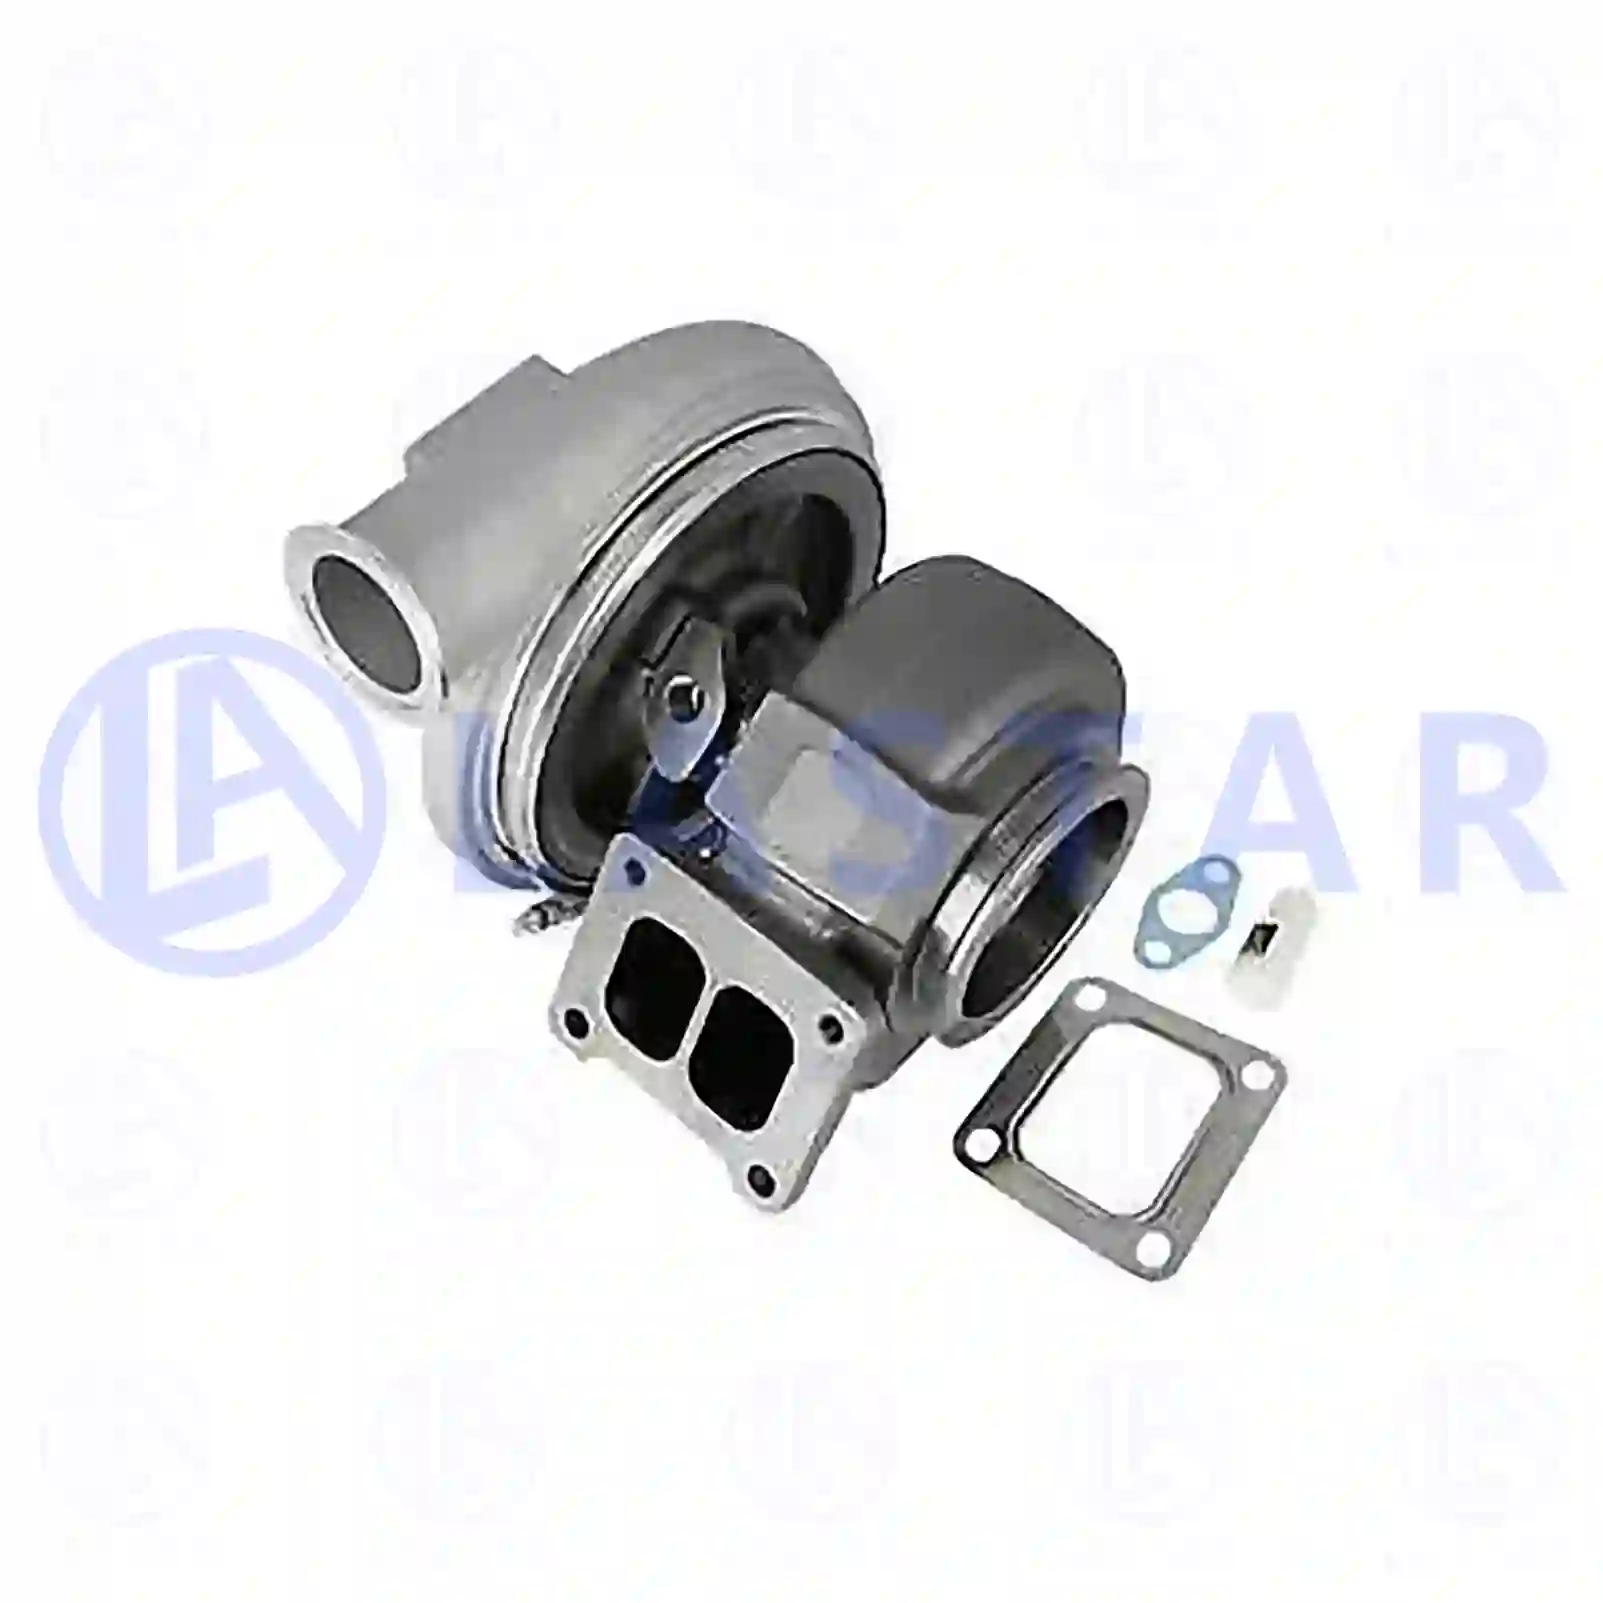 Turbocharger, with gasket kit, 77700728, 10570162, 10571612, 1394694, 1443190, 1484886, 1538372, 1538373, 1570162, 538372, 570162, ZG02209-0008 ||  77700728 Lastar Spare Part | Truck Spare Parts, Auotomotive Spare Parts Turbocharger, with gasket kit, 77700728, 10570162, 10571612, 1394694, 1443190, 1484886, 1538372, 1538373, 1570162, 538372, 570162, ZG02209-0008 ||  77700728 Lastar Spare Part | Truck Spare Parts, Auotomotive Spare Parts